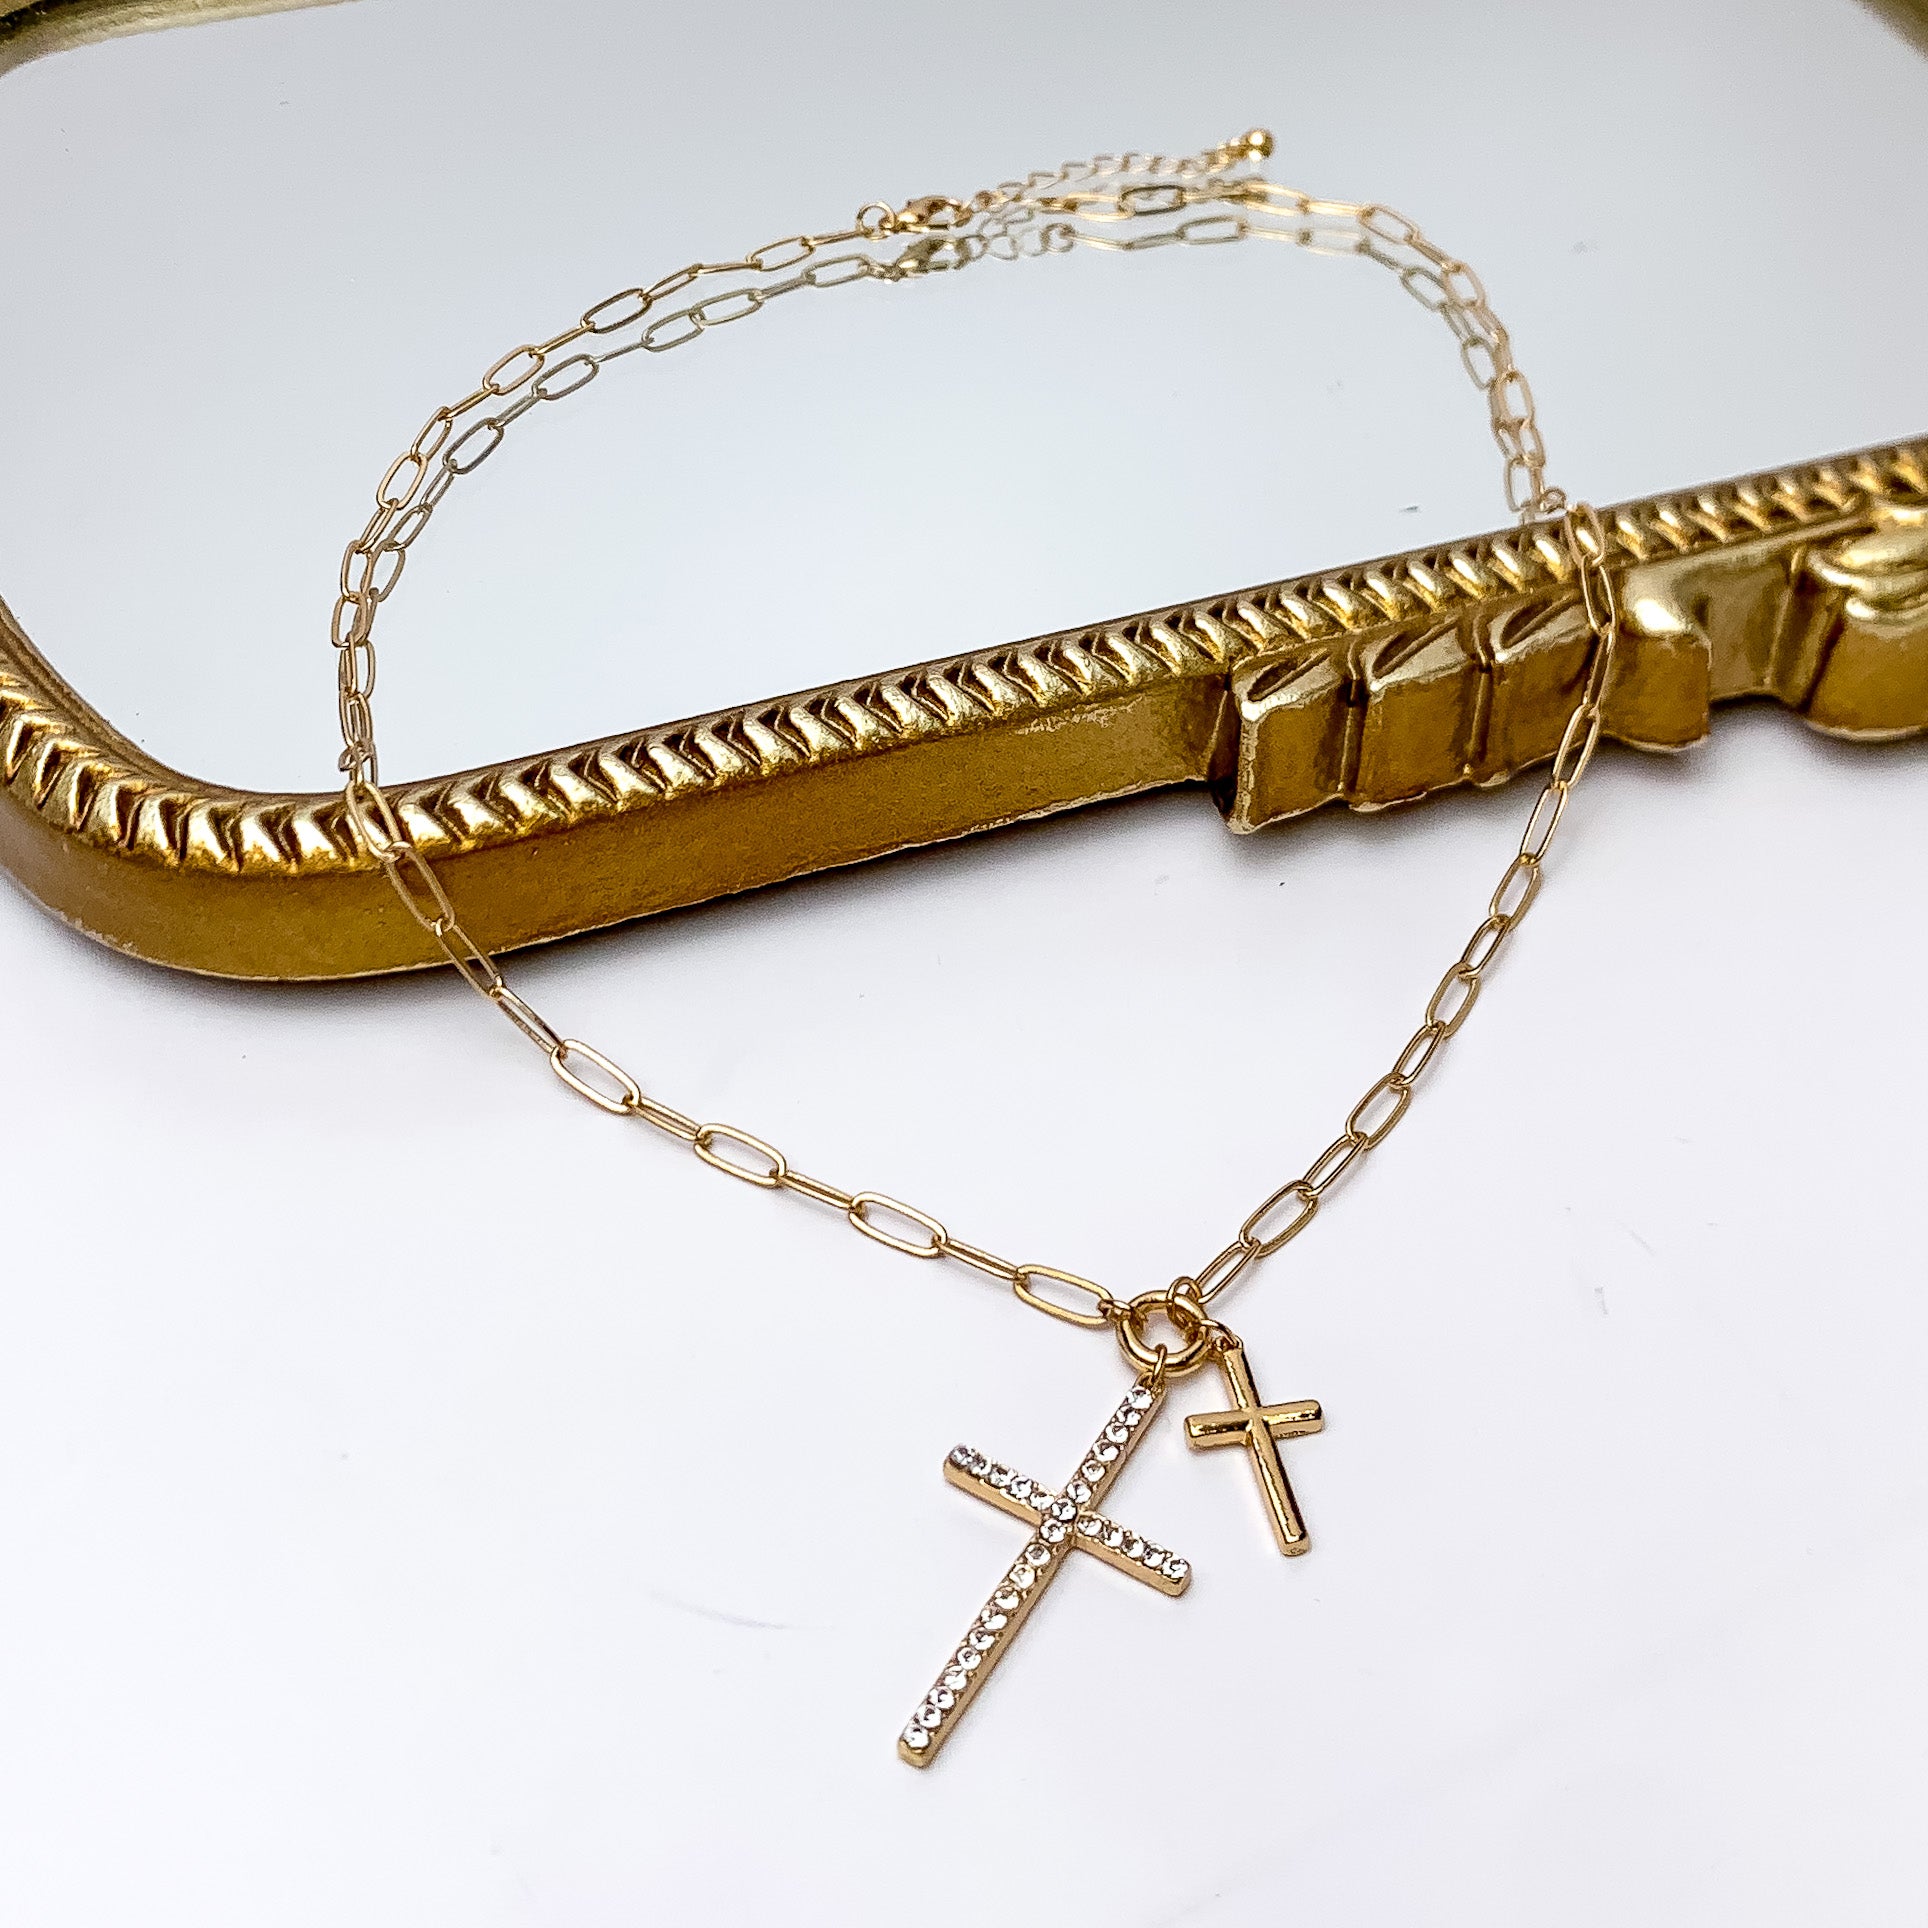 Gold Tone Double Cross Chain Necklace With Clear Crystals. Pictured on a white background with part of the necklace on a gold trimmed necklace.